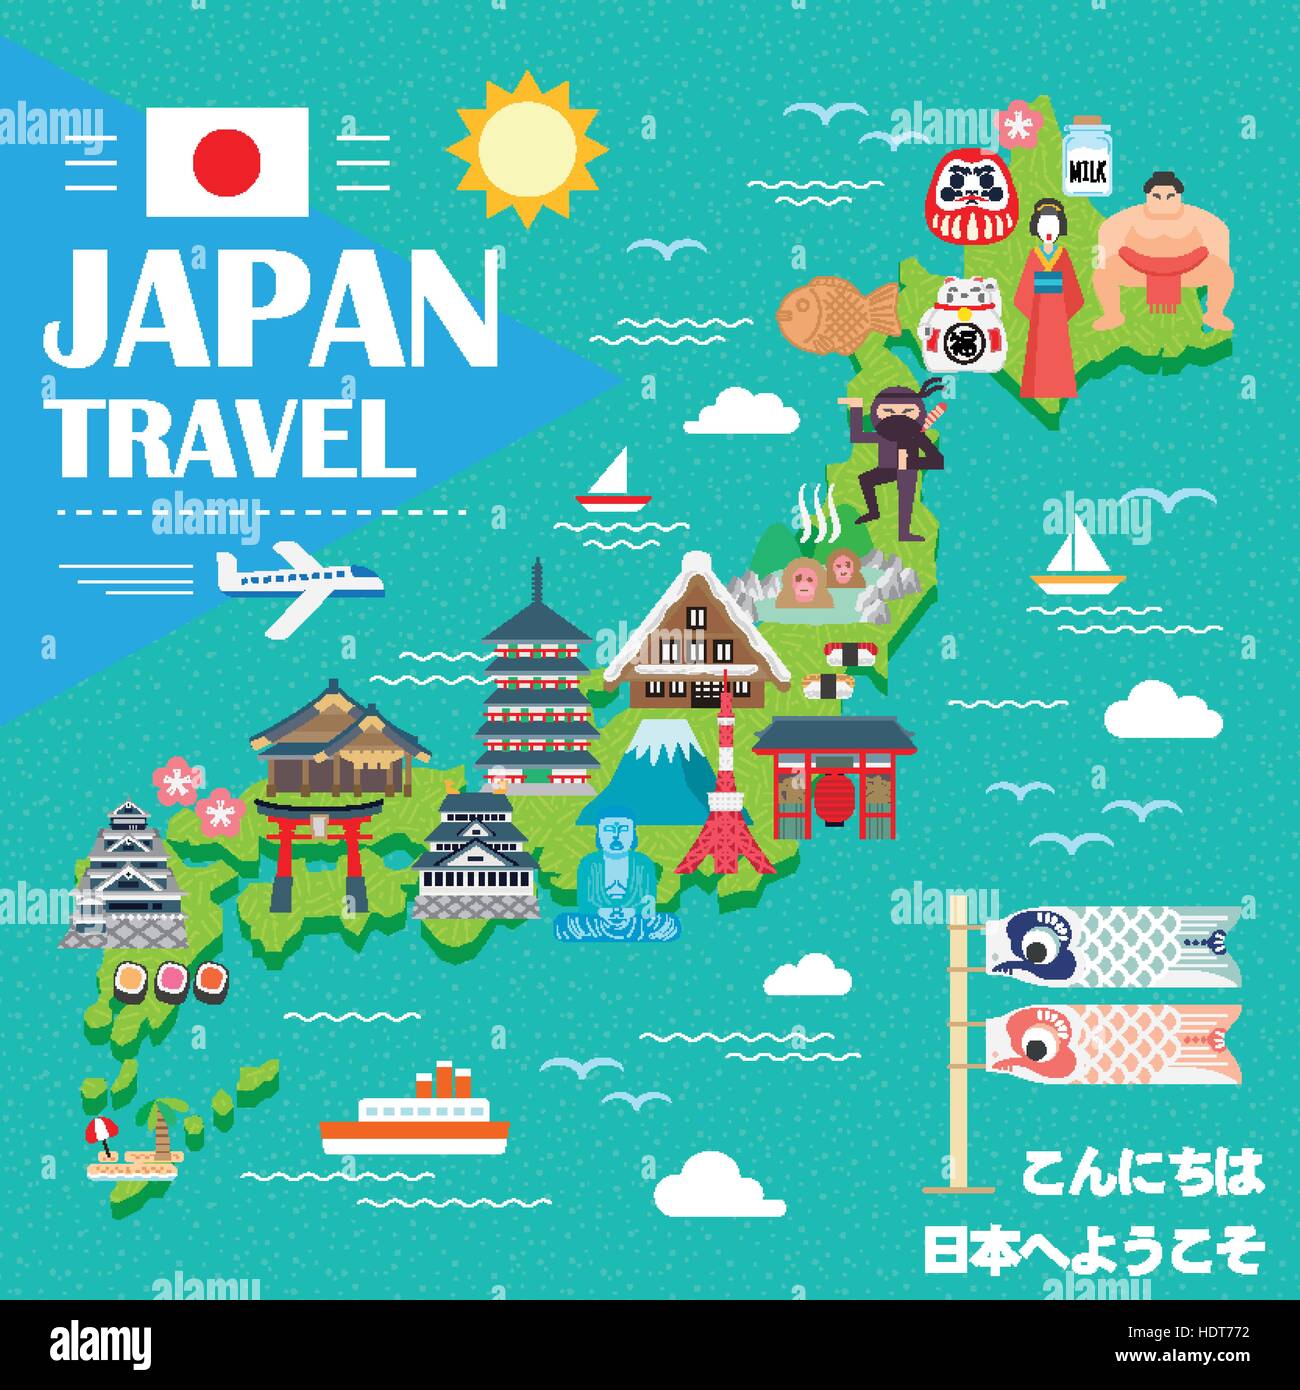 lovely Japan travel map - Hello welcome to Japan on lower right and ...